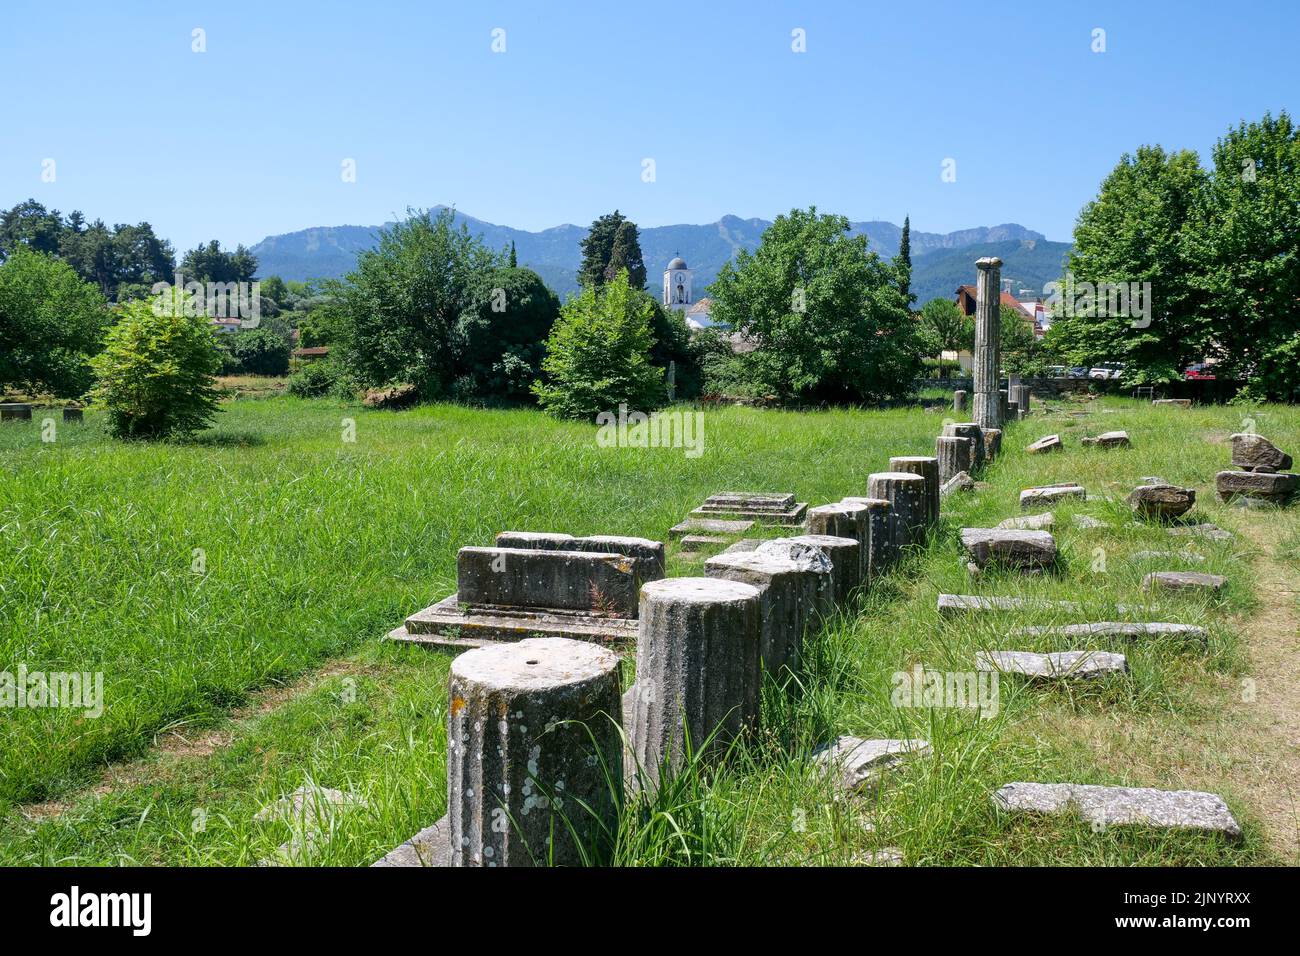 Ancient Thassos archeological site, Thassos island, Macedonia, North-Eastern Greece Stock Photo